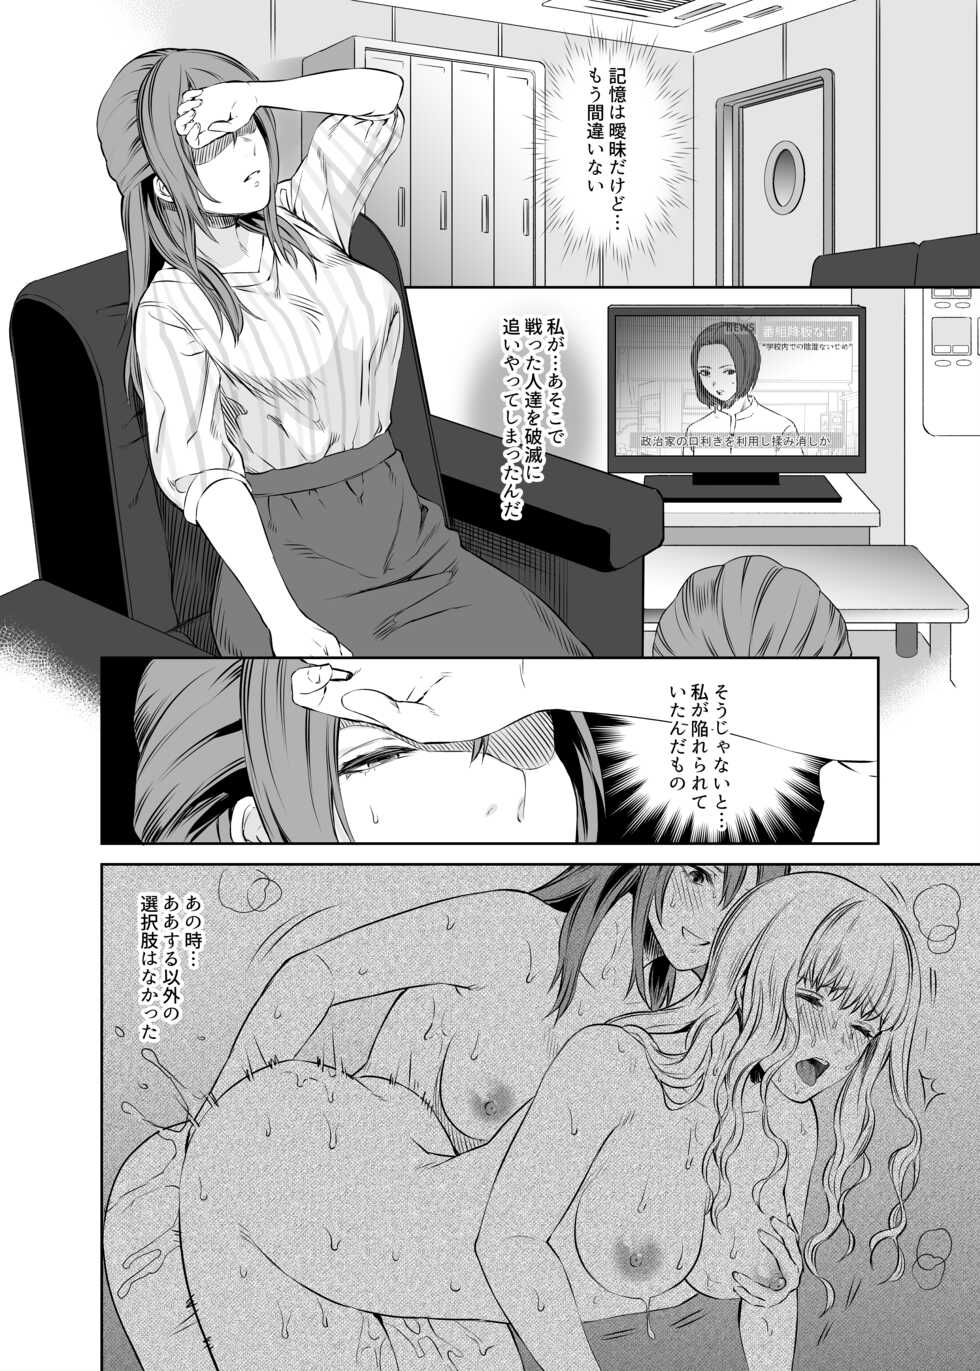 [Remora Works (Meriko)] LesFes Co -Candid Reporting- Vol. 003 - Page 5